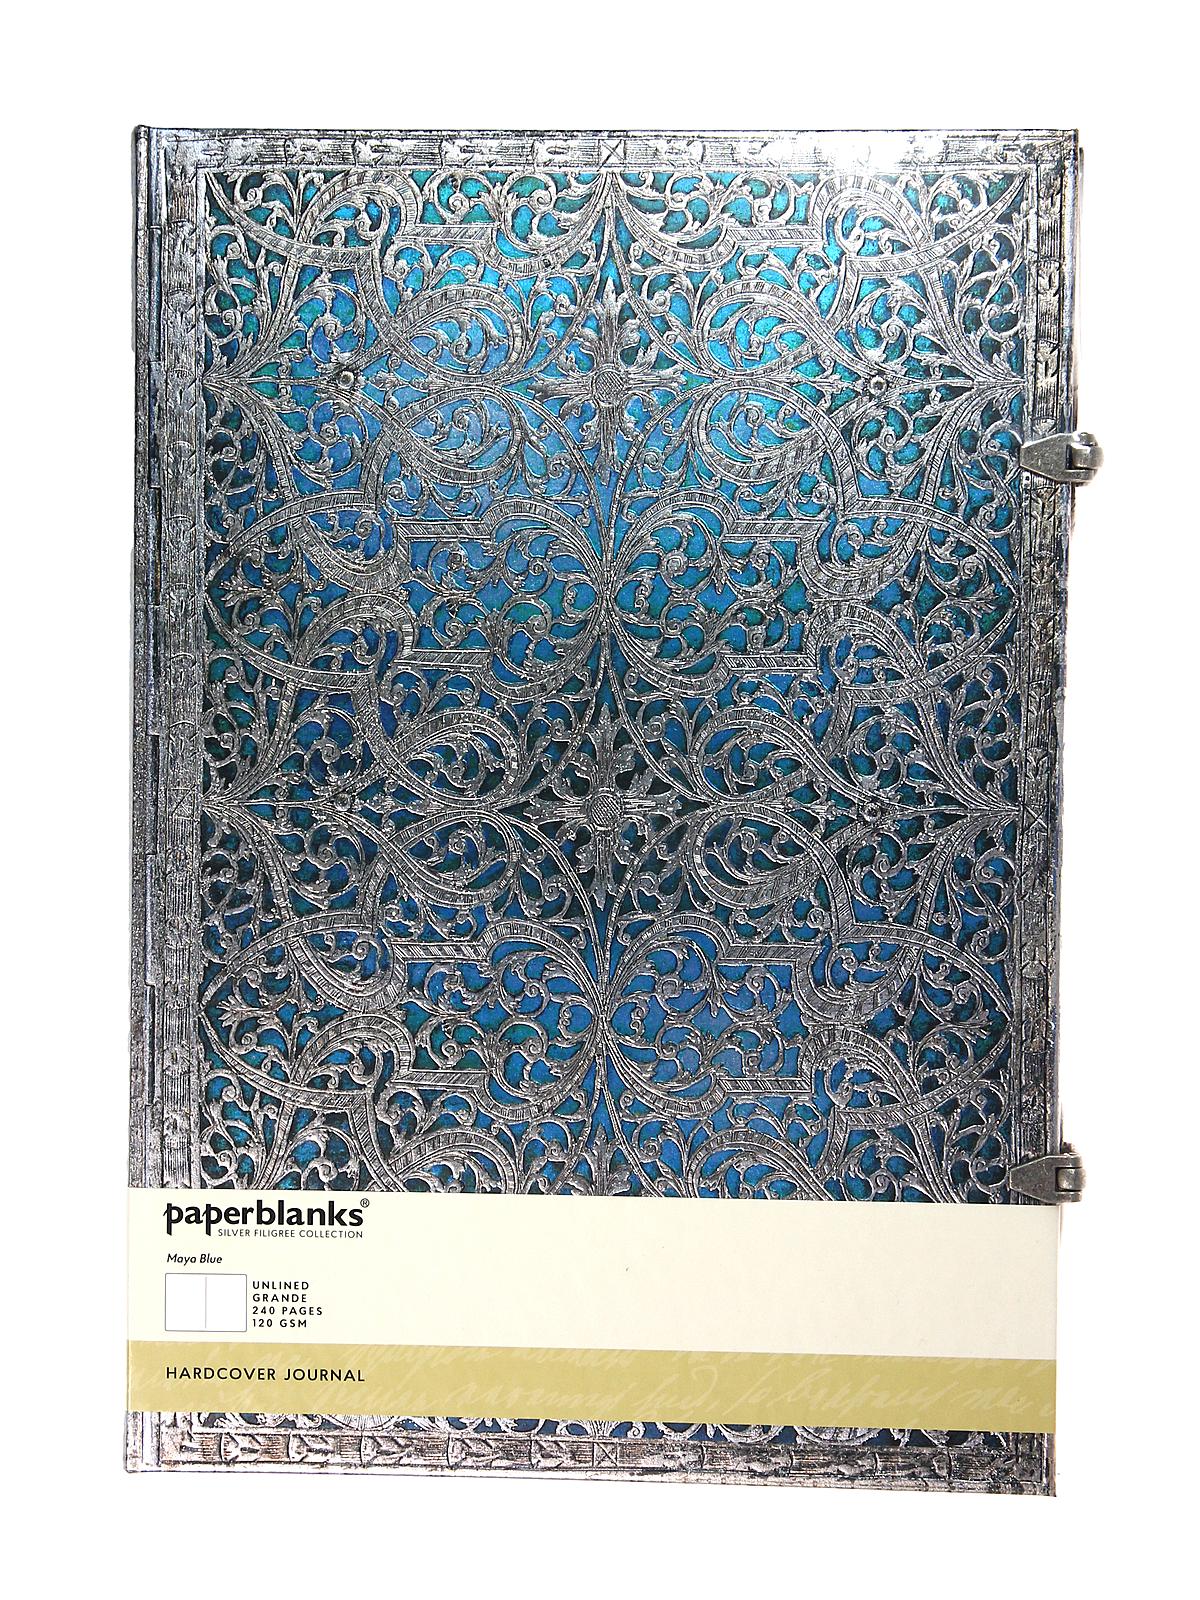 Silver Filigree Journals Maya Blue Grande, 8 1 4 In. X 11 3 4 In. 240 Pages, Unlined